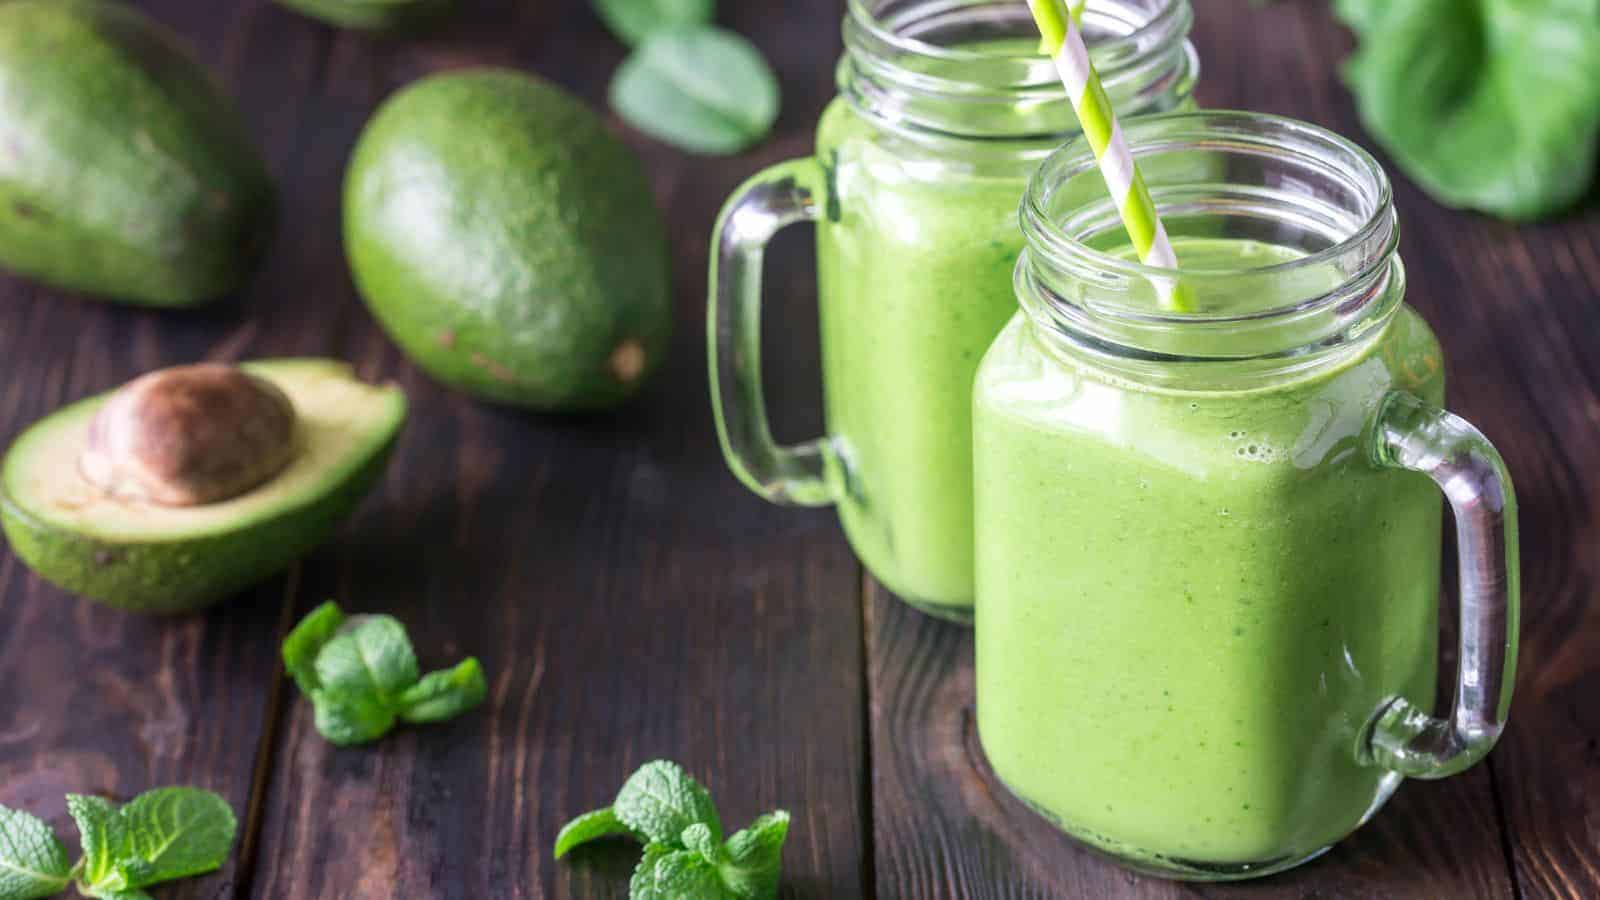 <p>Amp up your morning routine with the Green Goodness Smoothie-a lazy person’s shortcut to a nutritious start. Packed with greens and goodness, this blend is the perfect way to kickstart your day without spending extra time in the kitchen.<br><strong>Get the Recipe: </strong><a href="https://www.primaledgehealth.com/ketogenic-green-smoothie/?utm_source=msn&utm_medium=page&utm_campaign=18 extremely quick and easy breakfast ideas for lazy people">Green Goodness Smoothie</a></p>